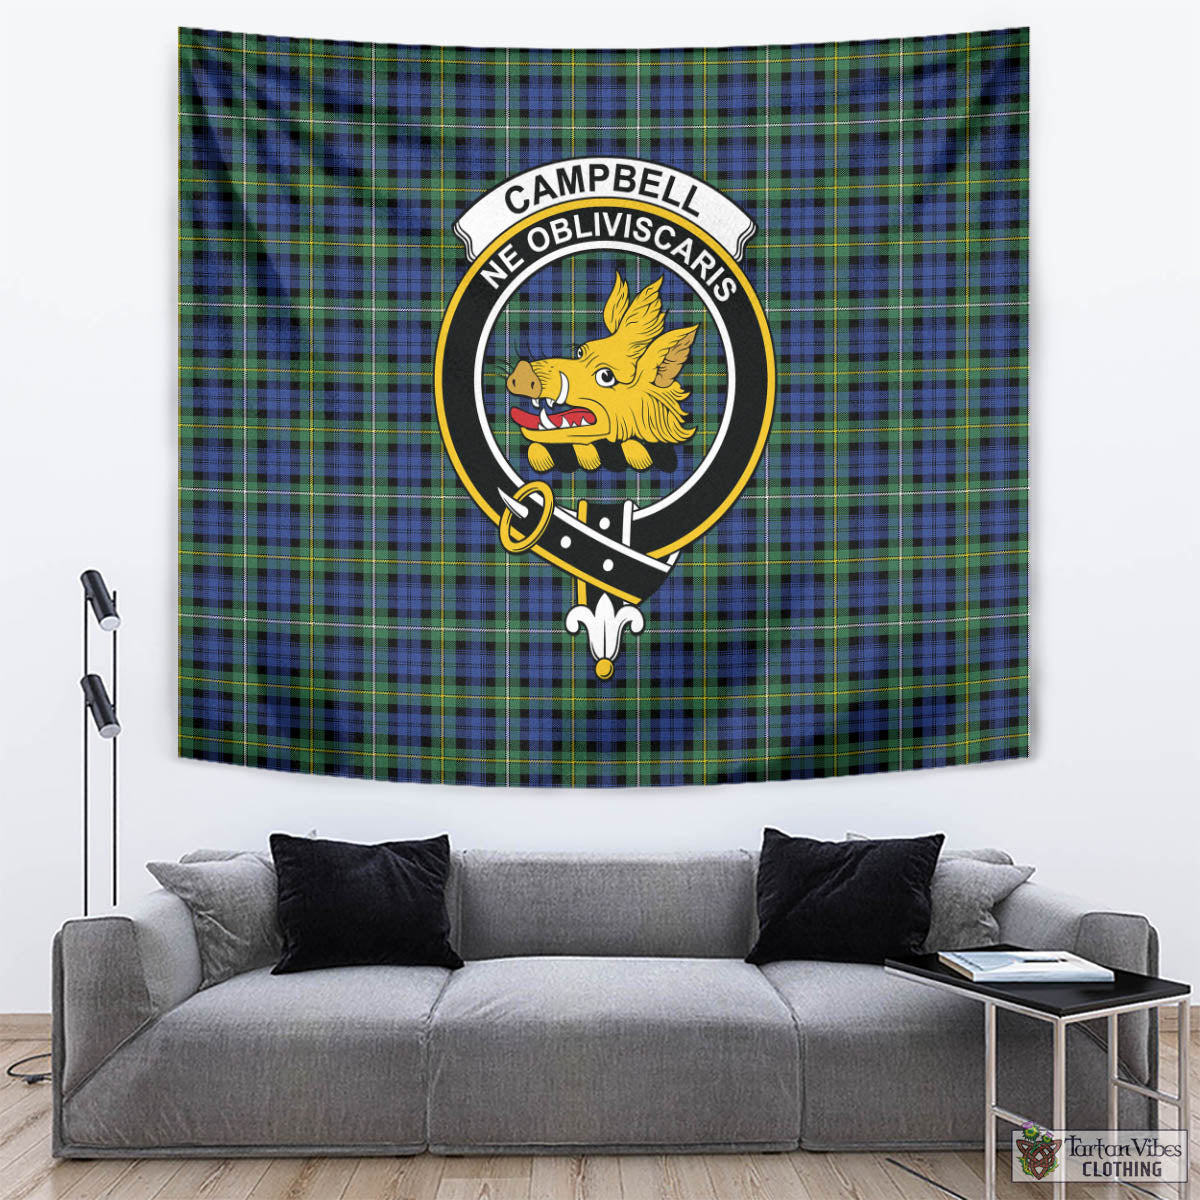 Tartan Vibes Clothing Campbell Argyll Ancient Tartan Tapestry Wall Hanging and Home Decor for Room with Family Crest